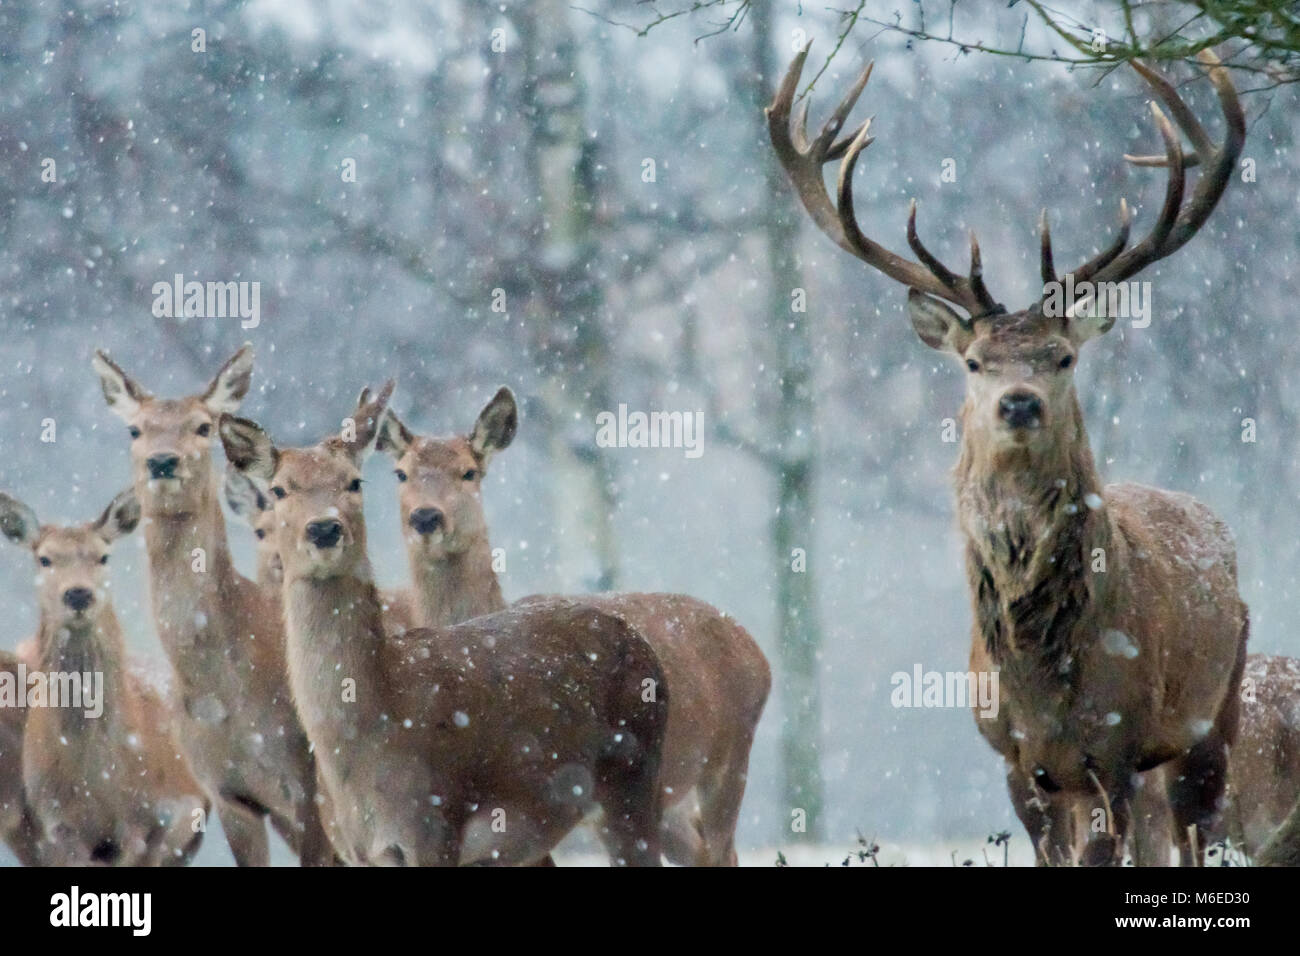 Stag and Deer in Snow Stock Photo